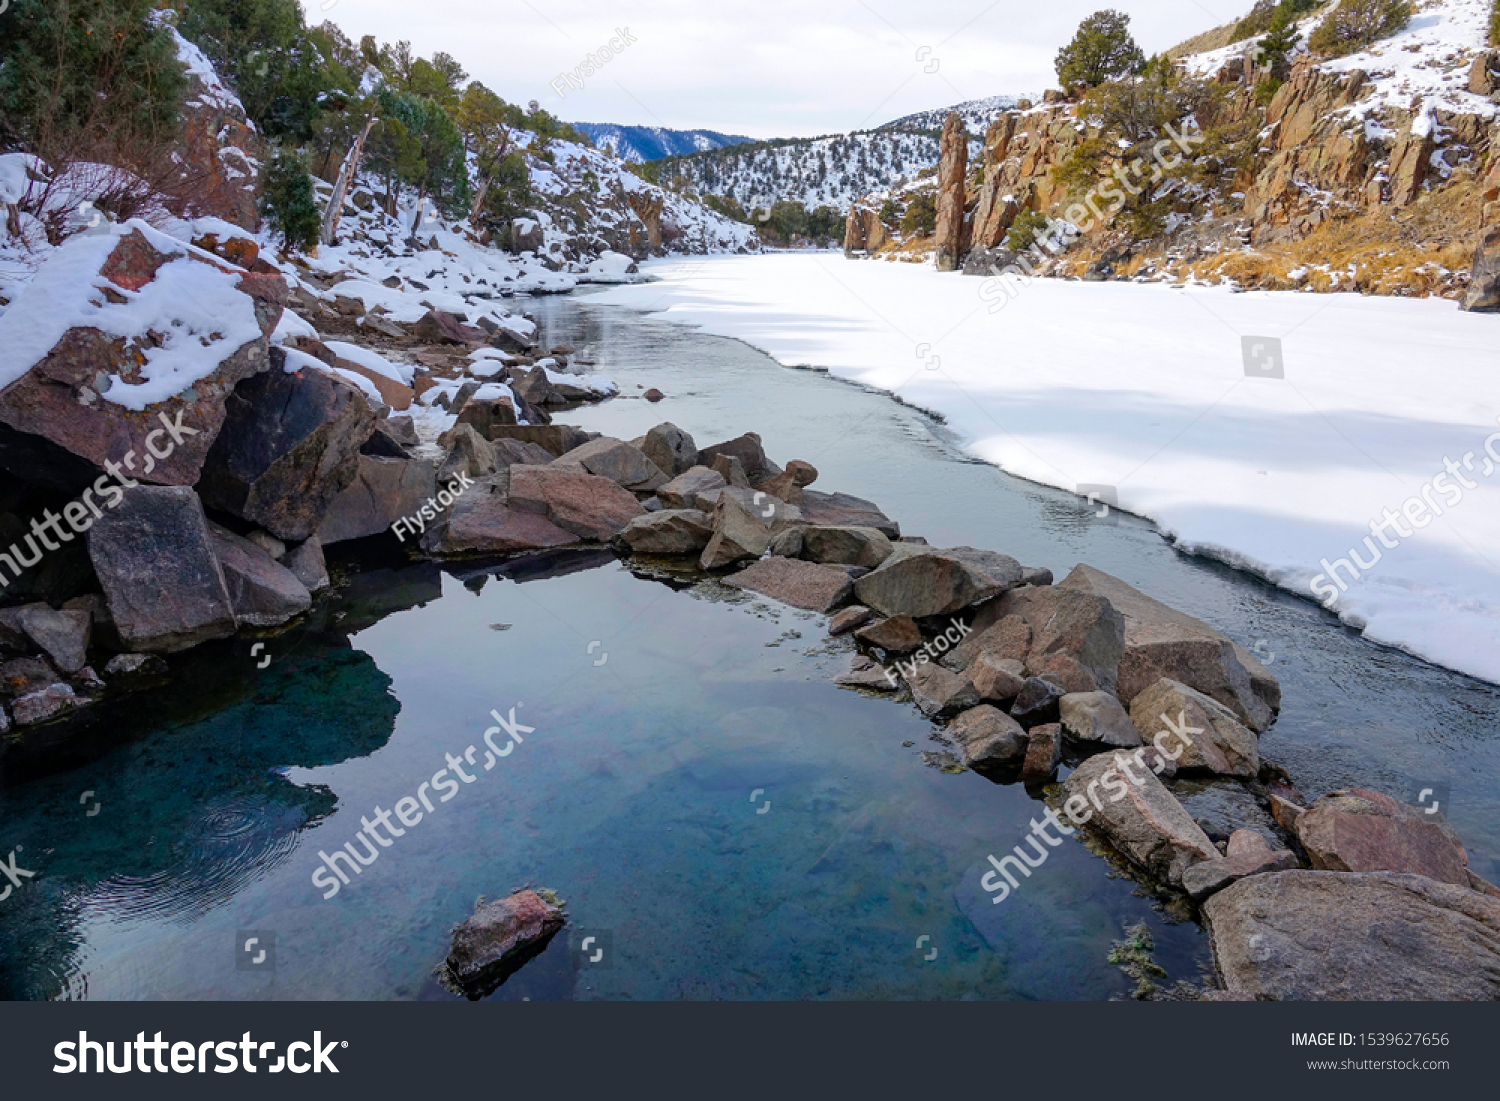 CLOSE UP: Picturesque view of an emerald colored natural hot bath overlooking the picturesque snowy landscape of Colorado. Gorgeous wintry nature surrounds the Radium Hot Springs. Beautiful scenery #1539627656